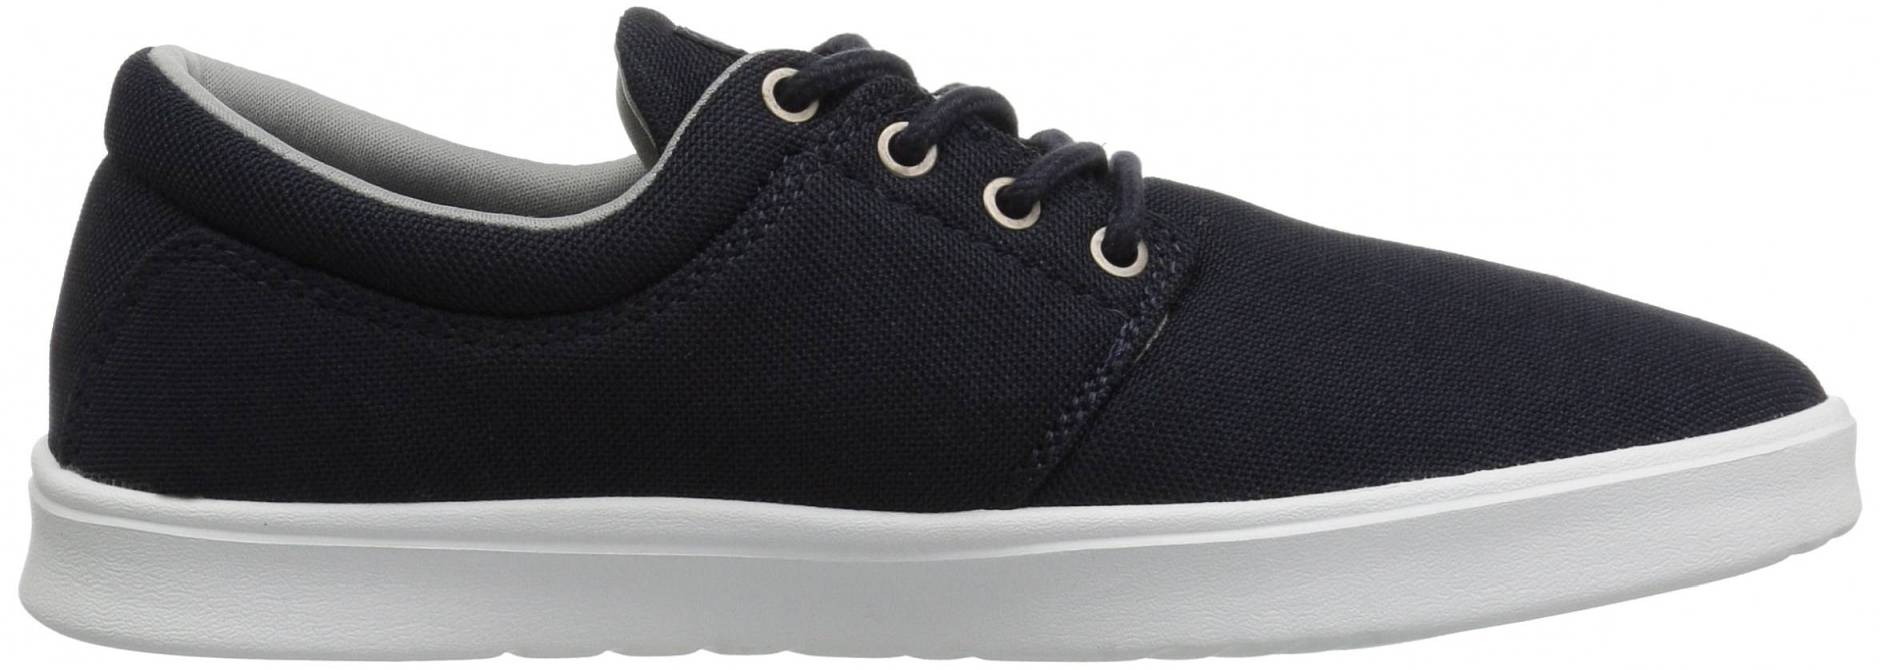 Etnies Barrage SC – Shoes Reviews & Reasons To Buy